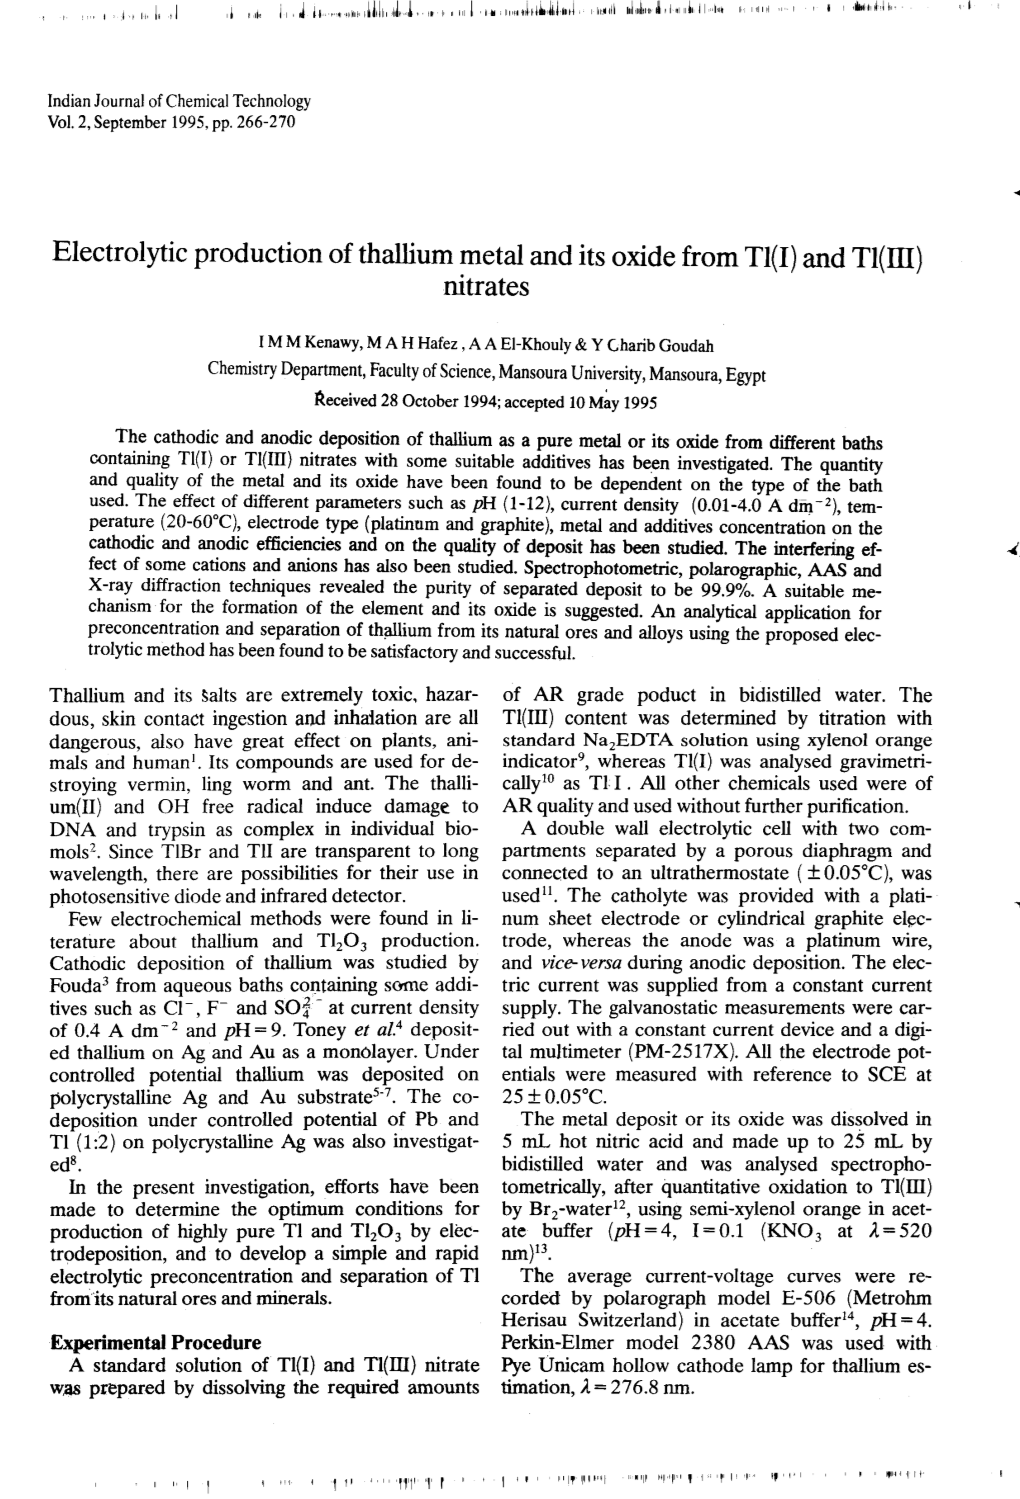 Electrolytic Production of Thallium Metal and Its Oxide from TI(I) and TI(M) Nitrates